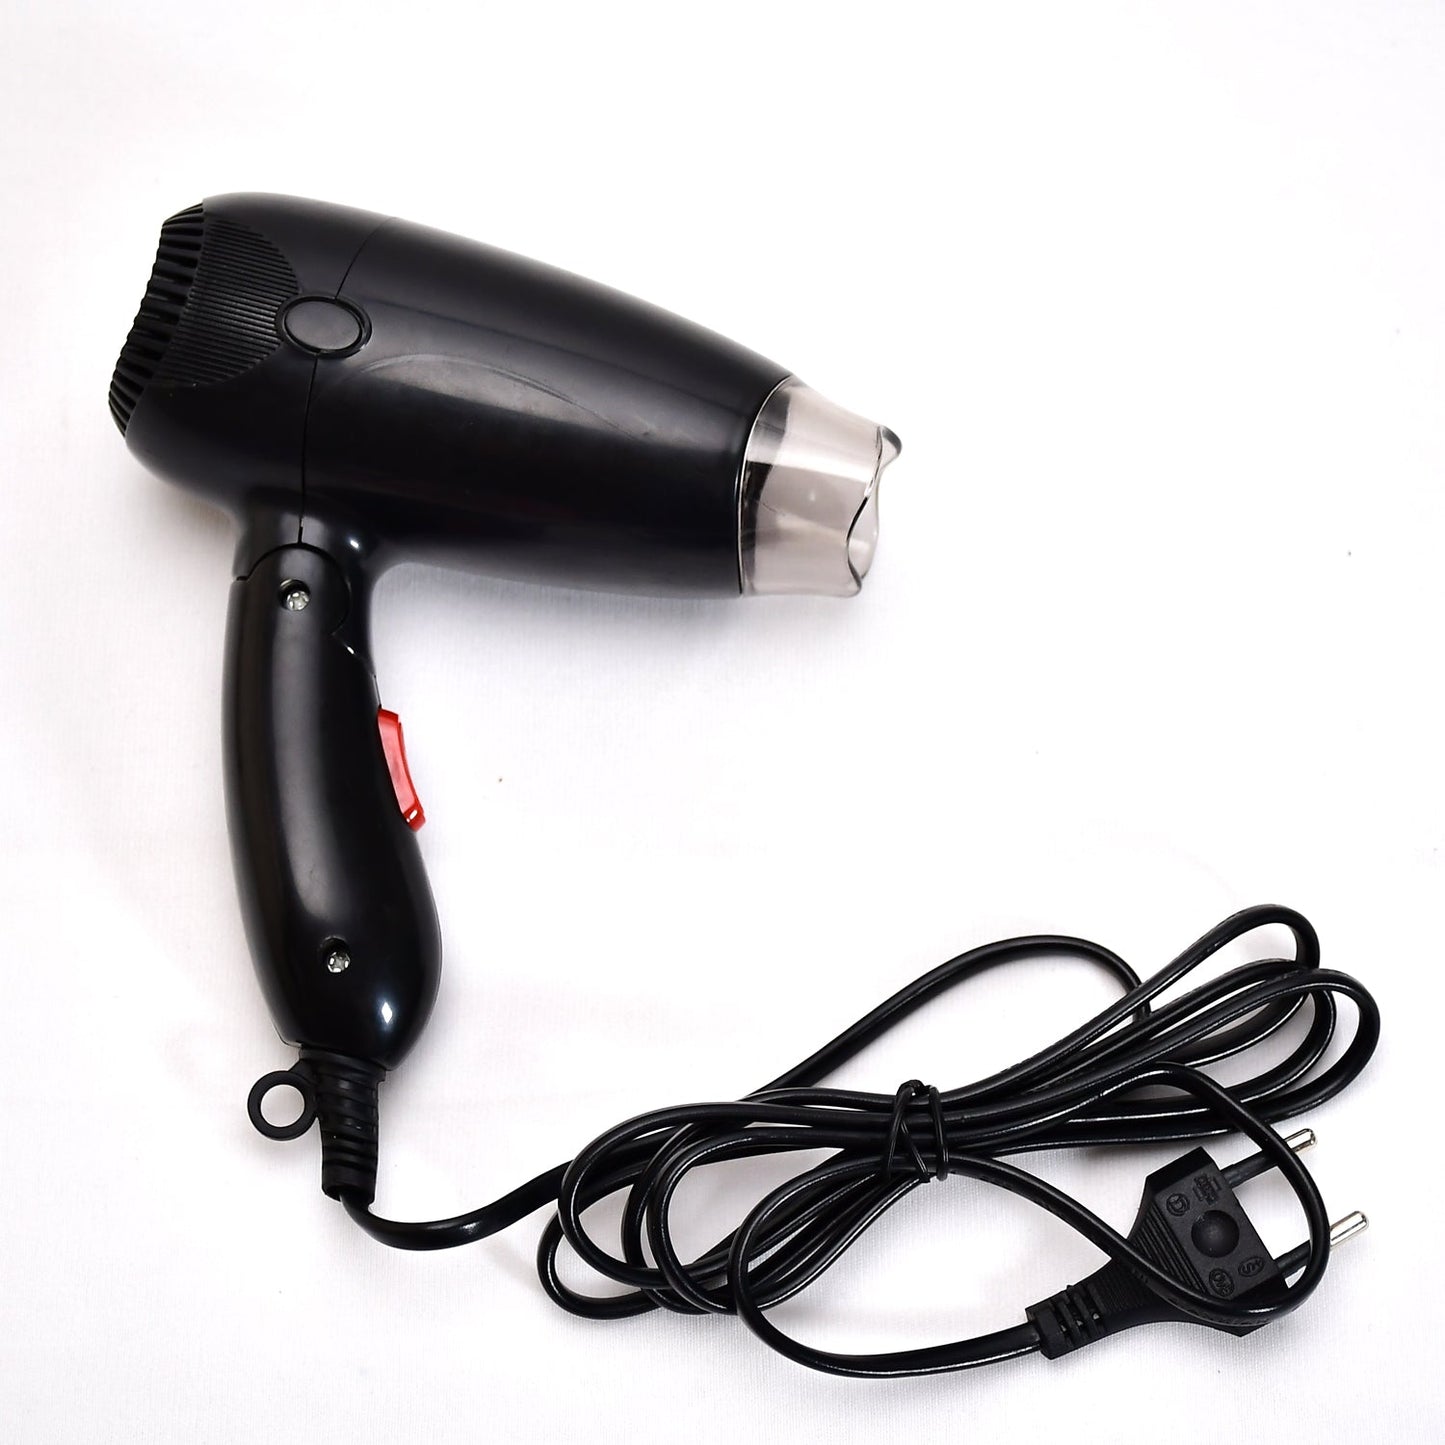 6612 Hair Dryer With Foldable Handle For Easy Portability And Storage 